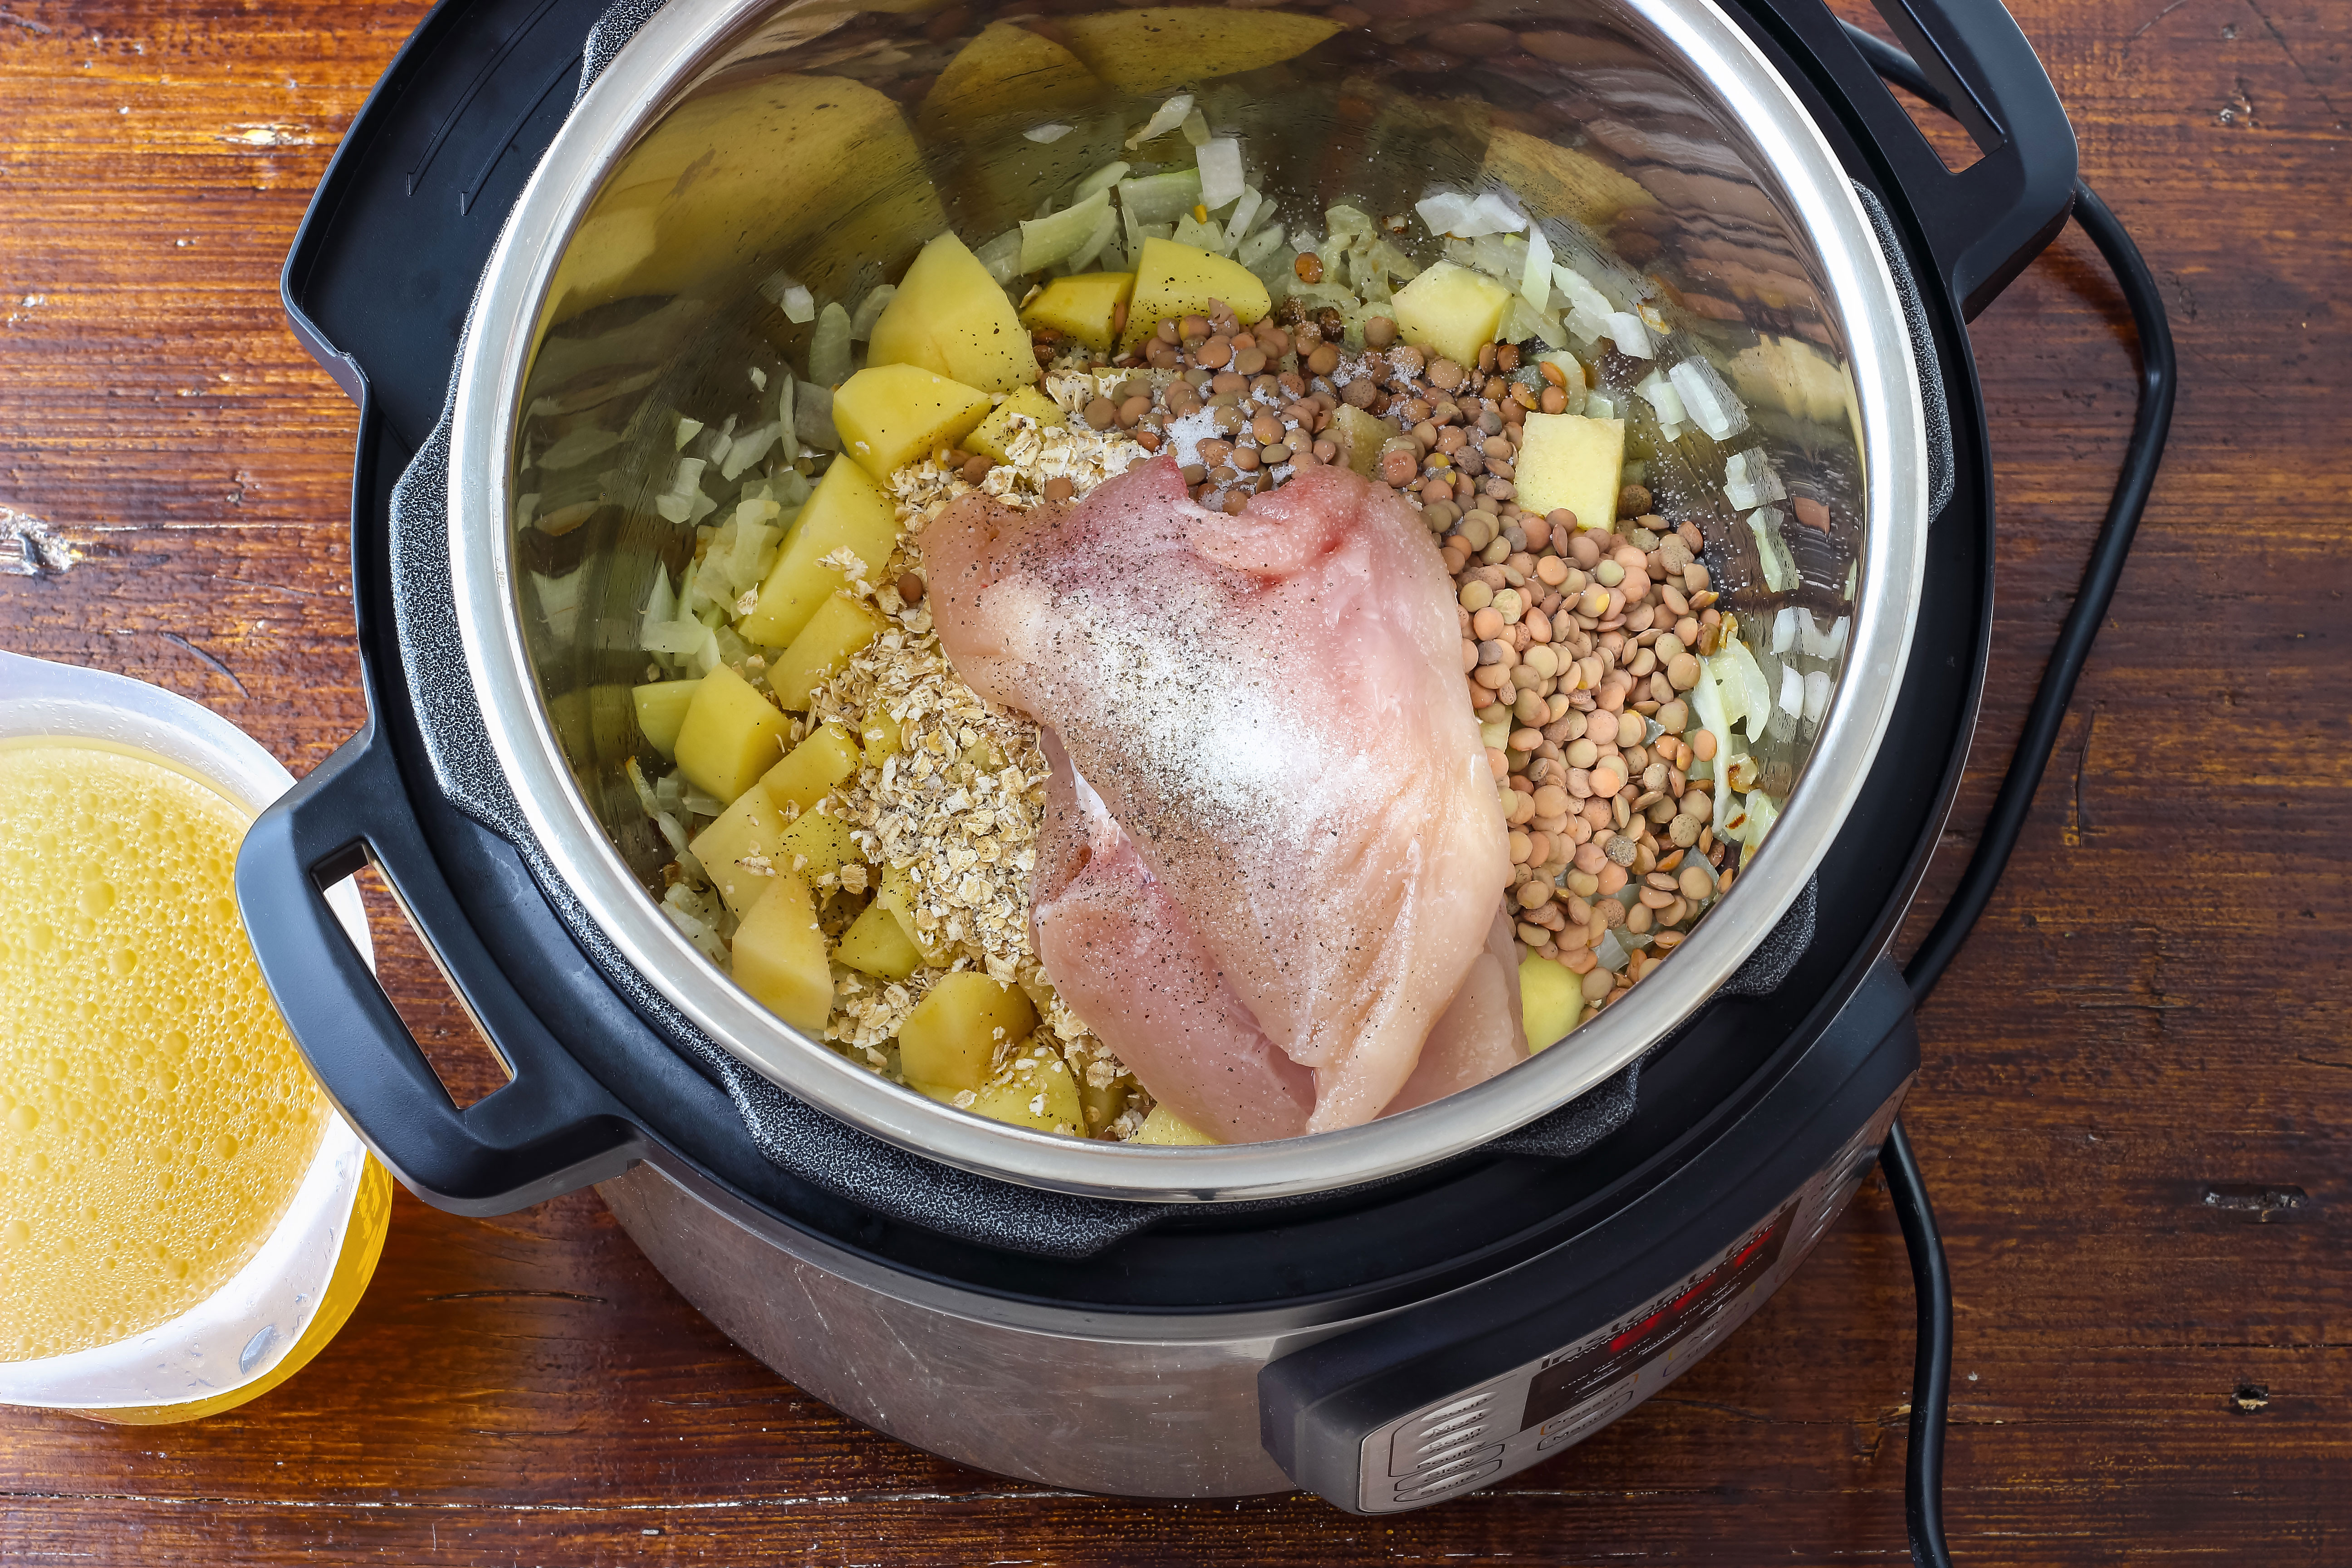 An instant pot pressure cooker with chicken, butter, vegetables, and seasoning inside.